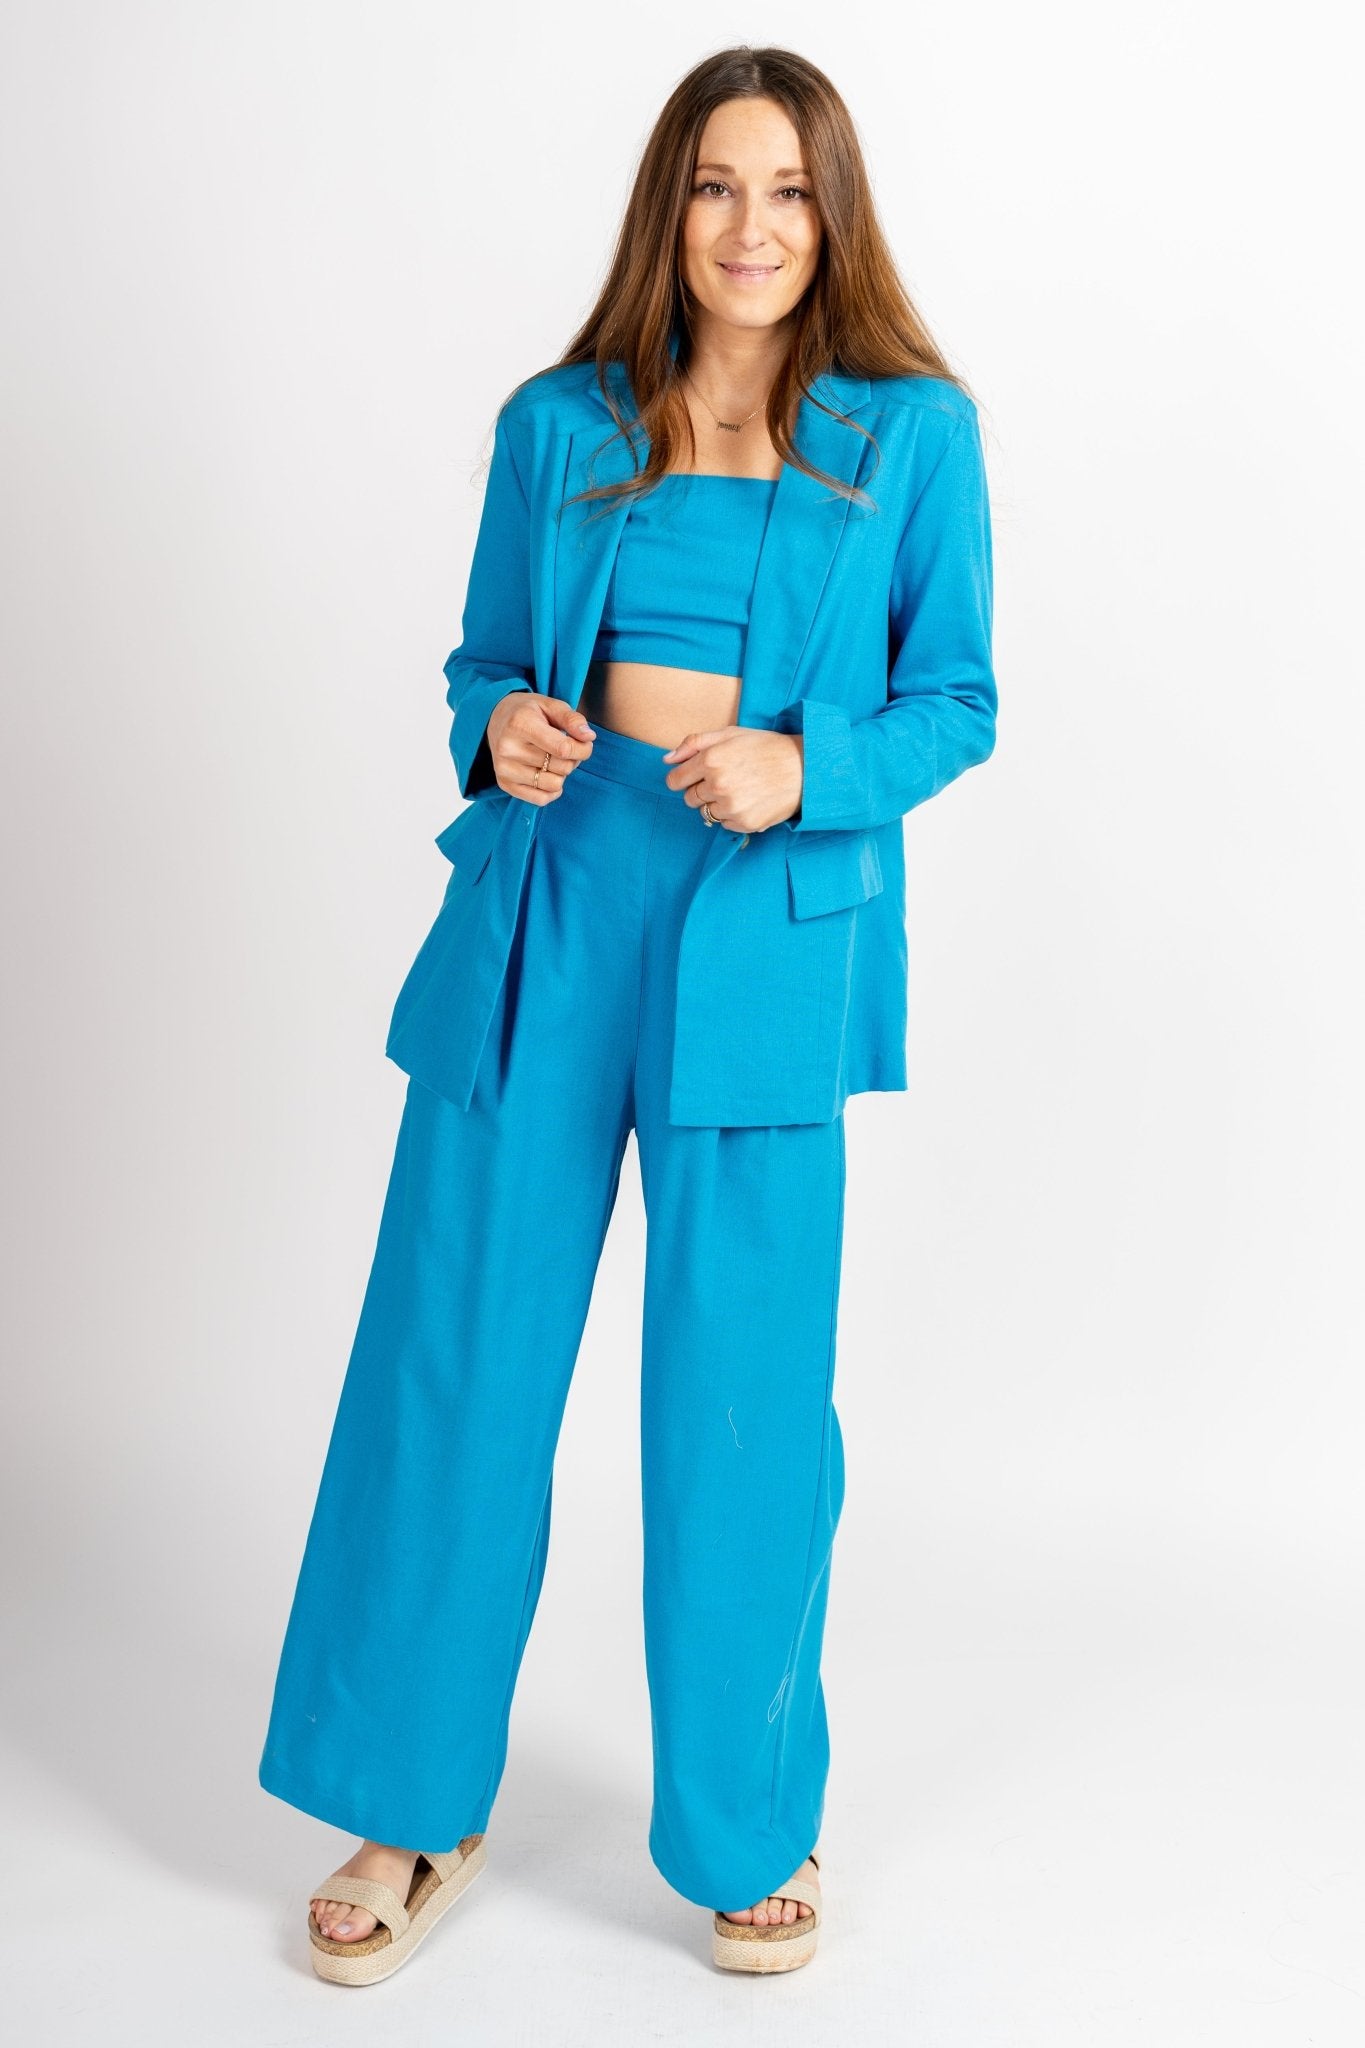 Single button blazer turquoise blue - Stylish Blazer - Trendy Staycation Outfits at Lush Fashion Lounge Boutique in Oklahoma City